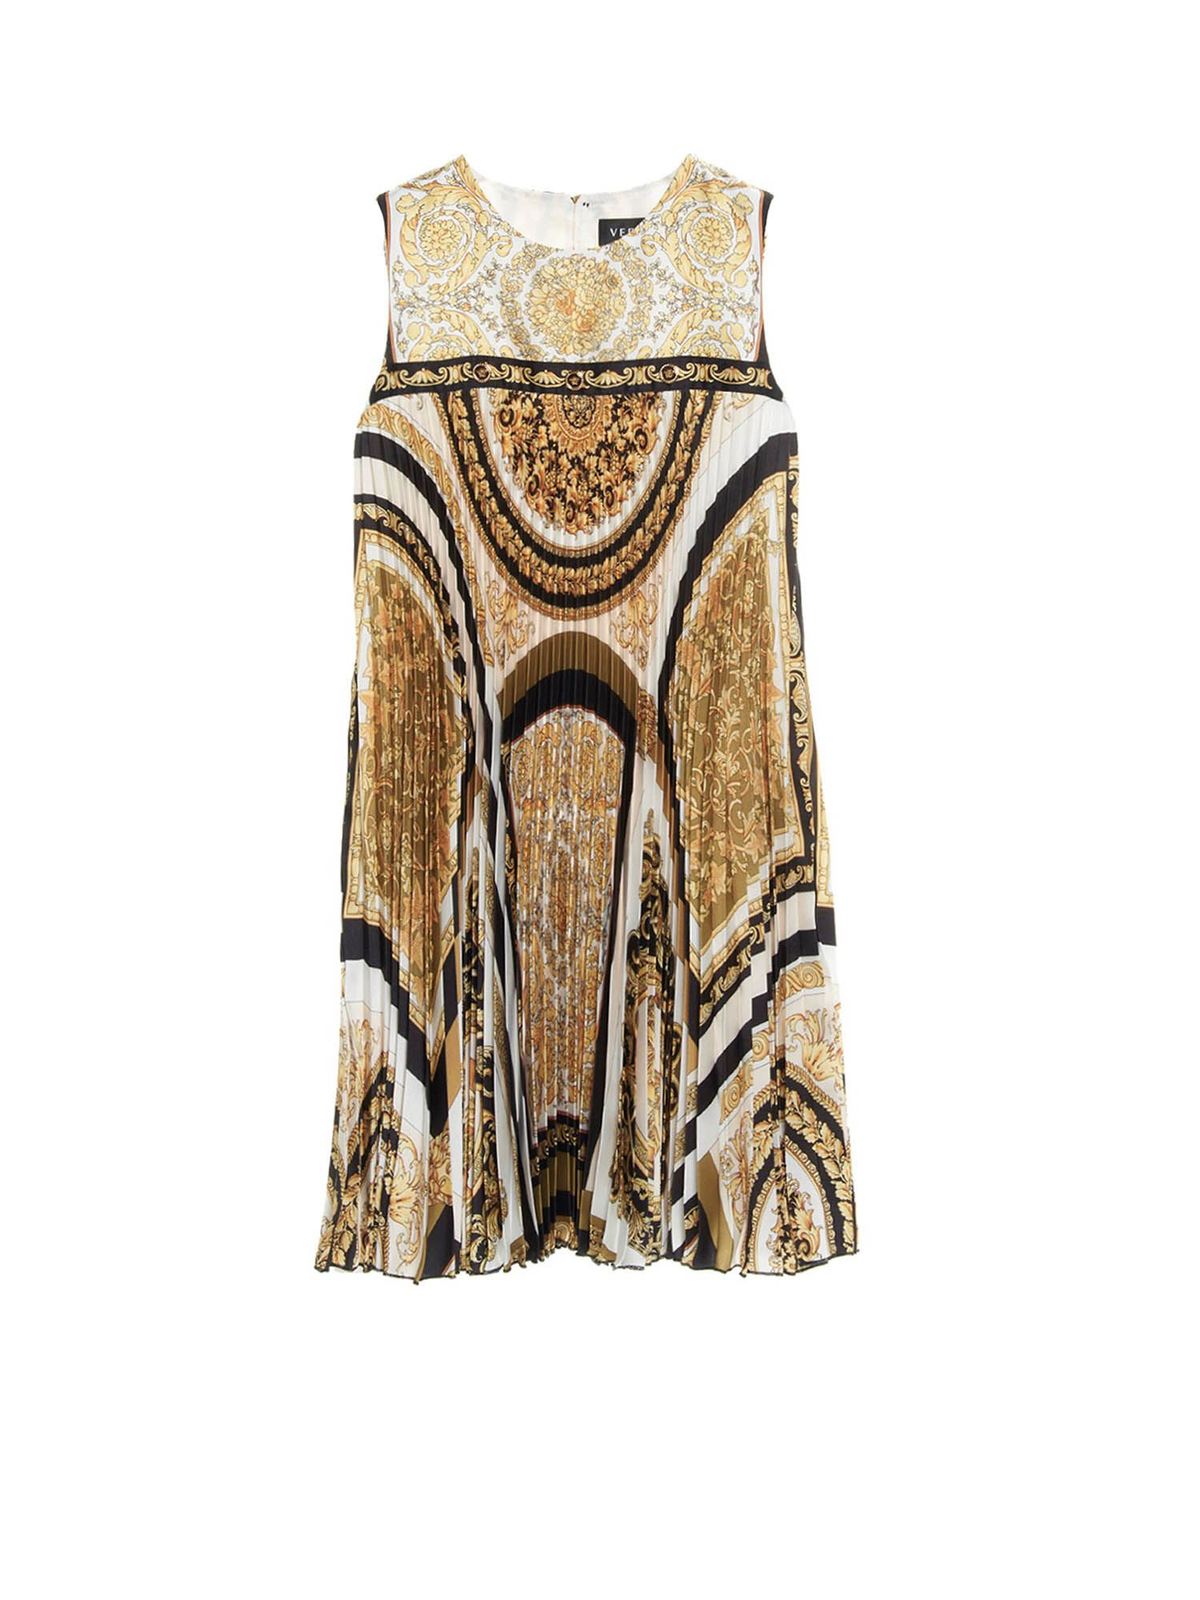 VERSACE YOUNG BAROCCO DRESS IN WHITE BLACK AND GOLD COLOR